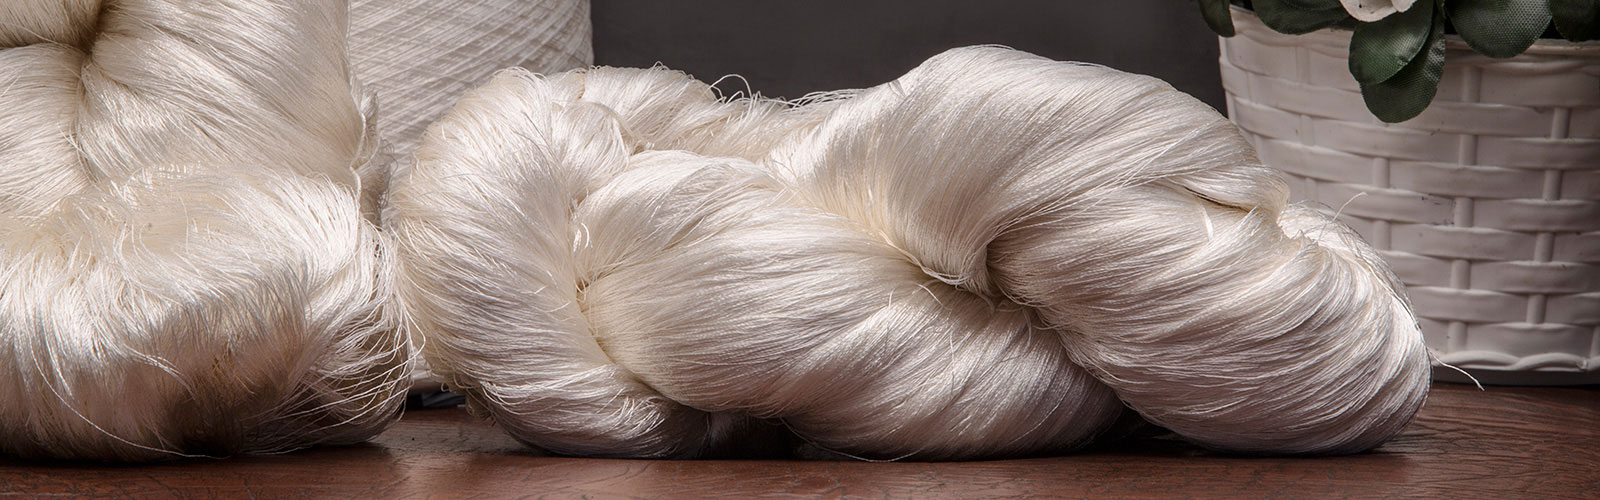 Essential - an exceptional raw material for embroidery yarns, lace and braids